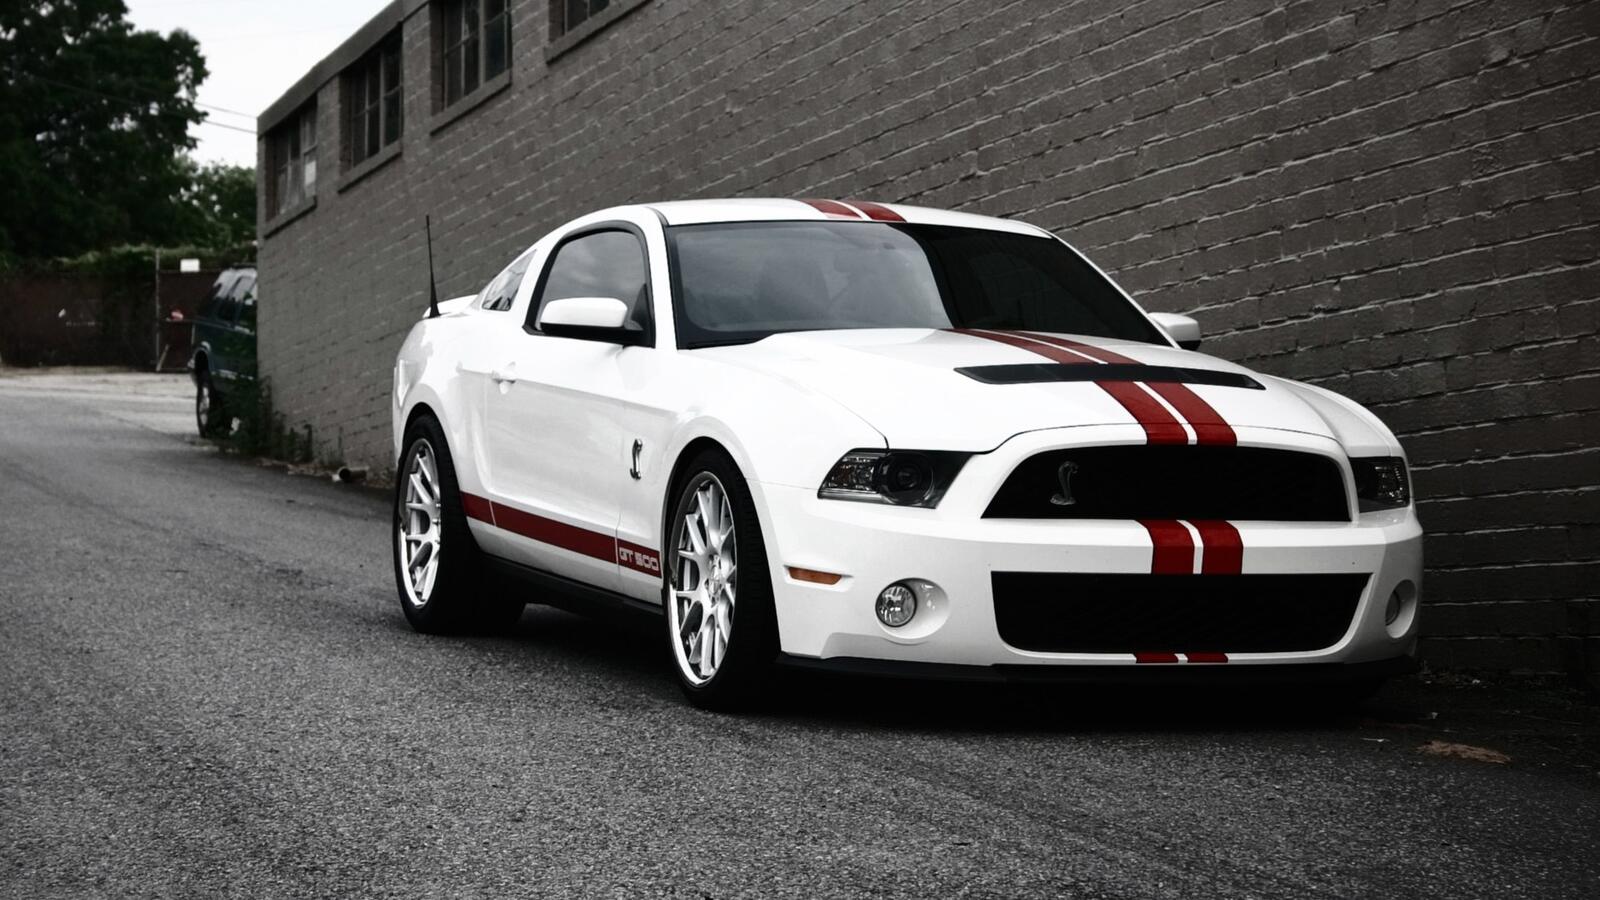 Wallpapers car Ford Mustang sports car on the desktop